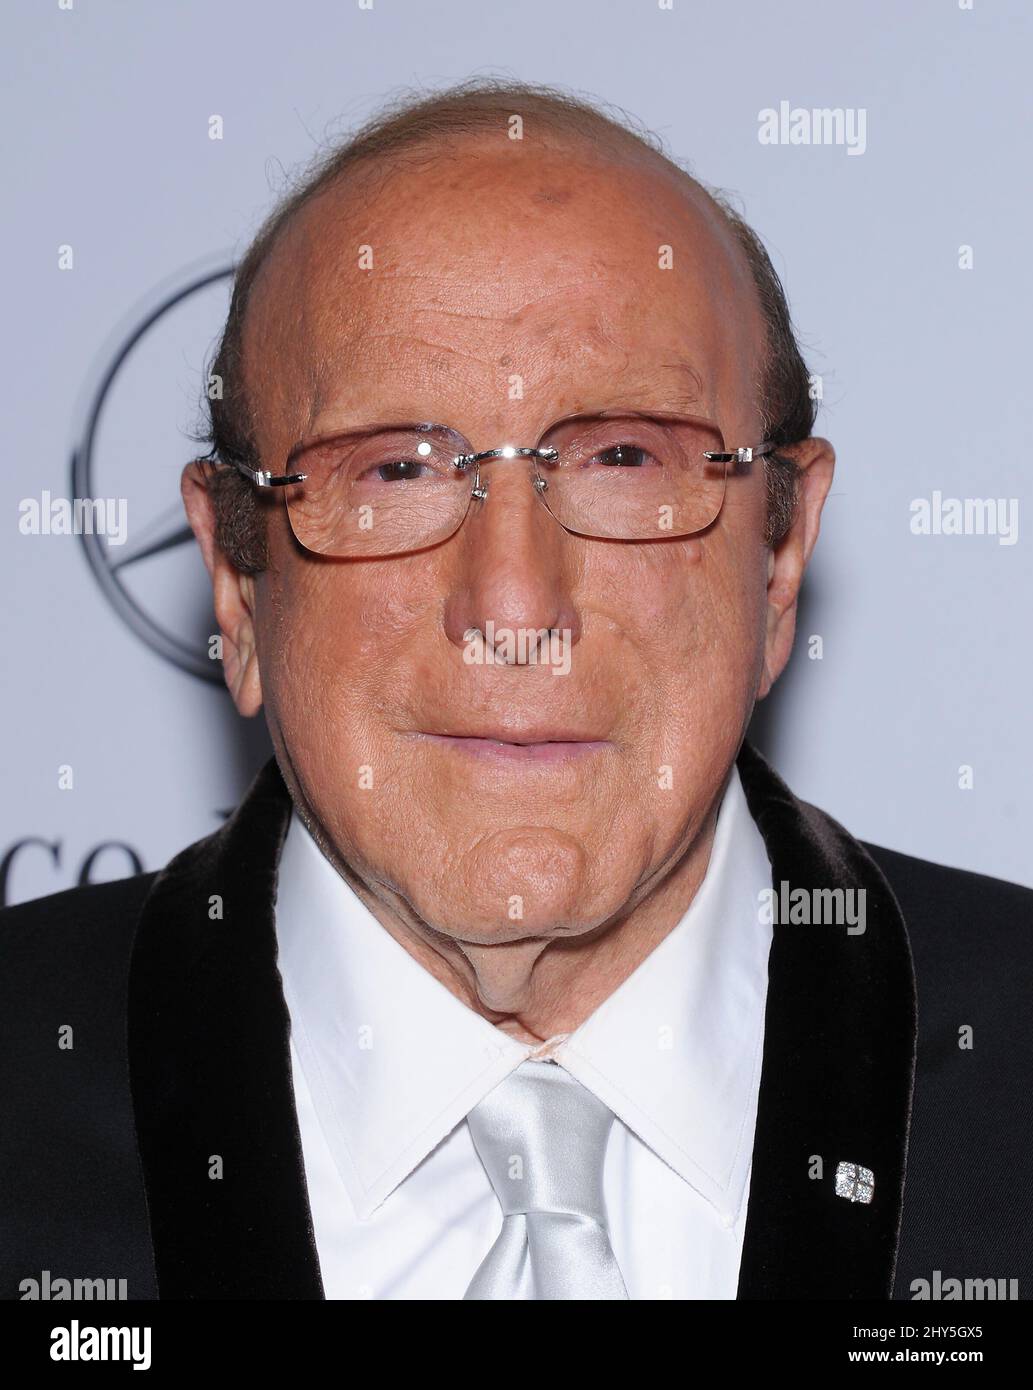 Clive Davis arriving for the Carousel Of Hope Ball held at the Beverly Hilton Hotel, Los Angeles. Stock Photo